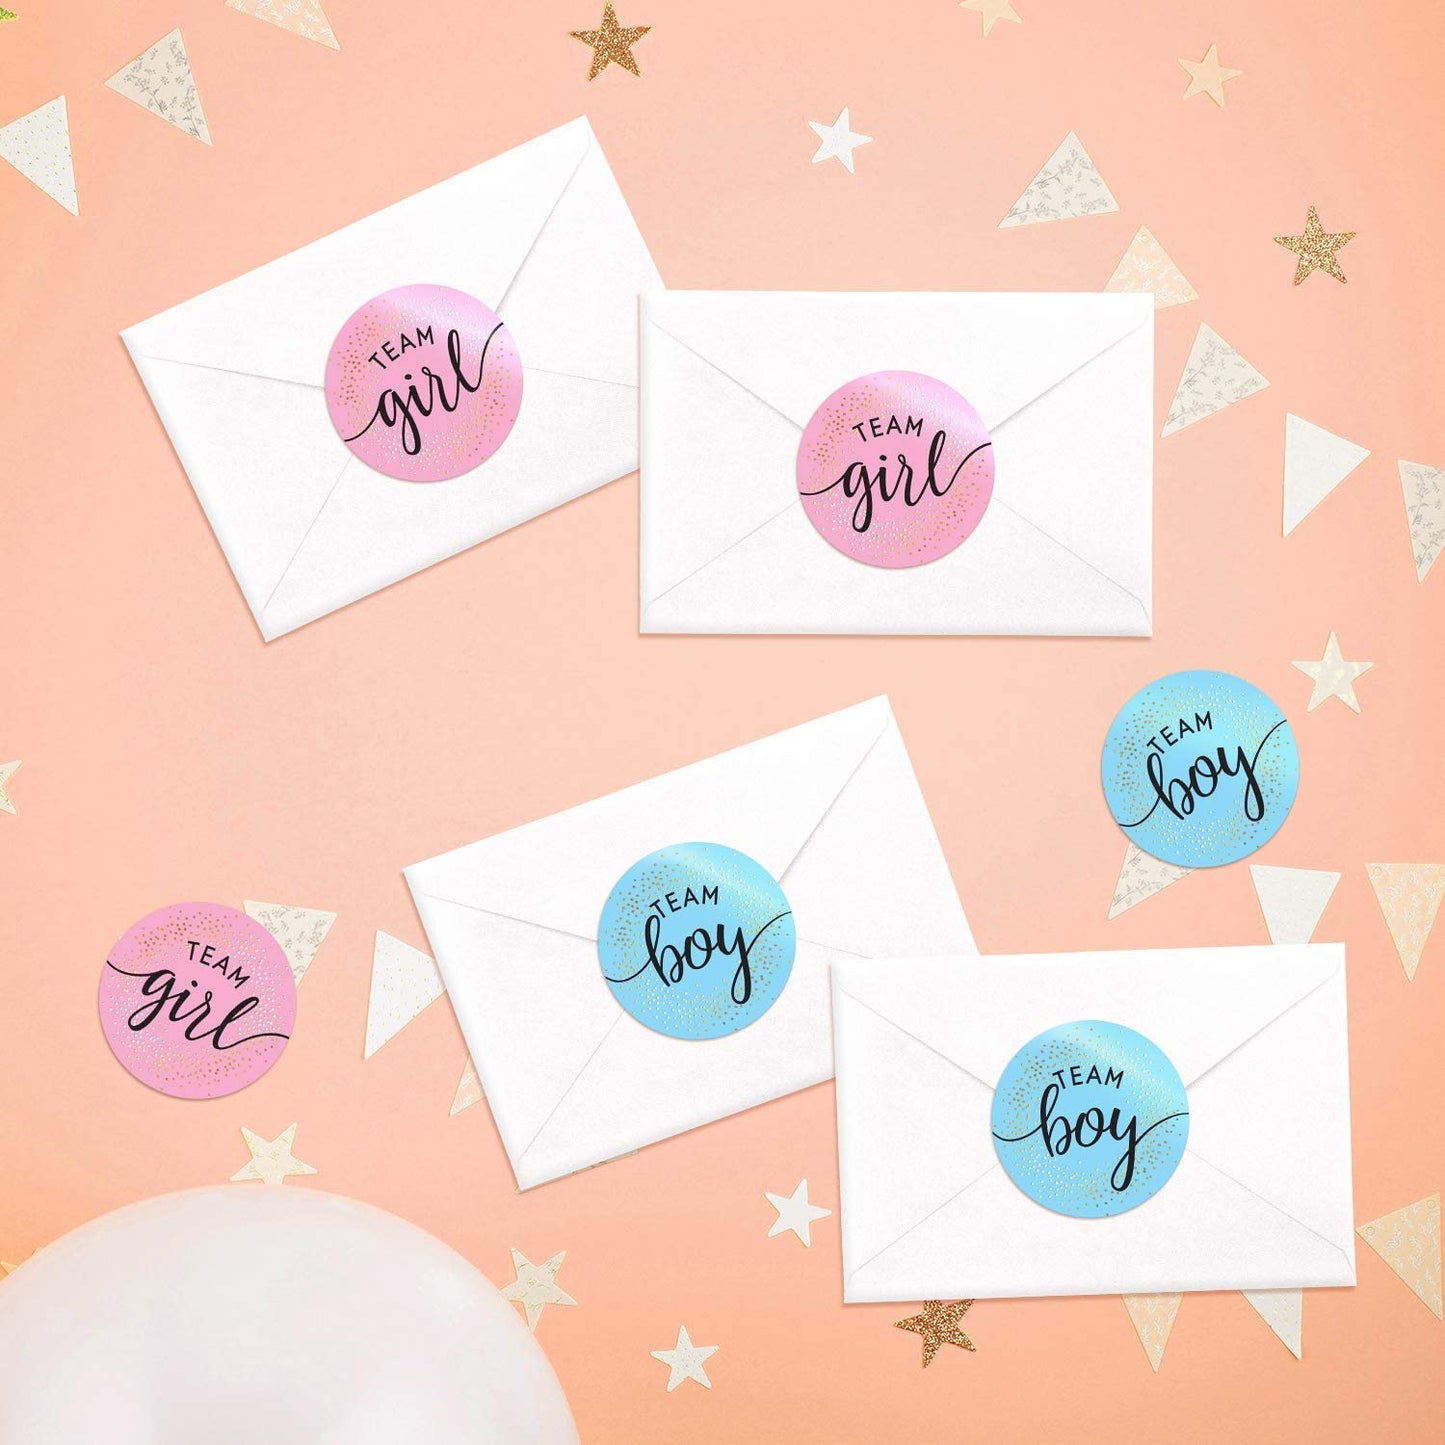 2.25” Gender Reveal Stickers for Party Invitations and Voting Games (80 Count) - Team Boy and Team Girl Labels with Gold Foil for Reveal Parties and Baby Showers | Easy to Peel and Stick (Circle)